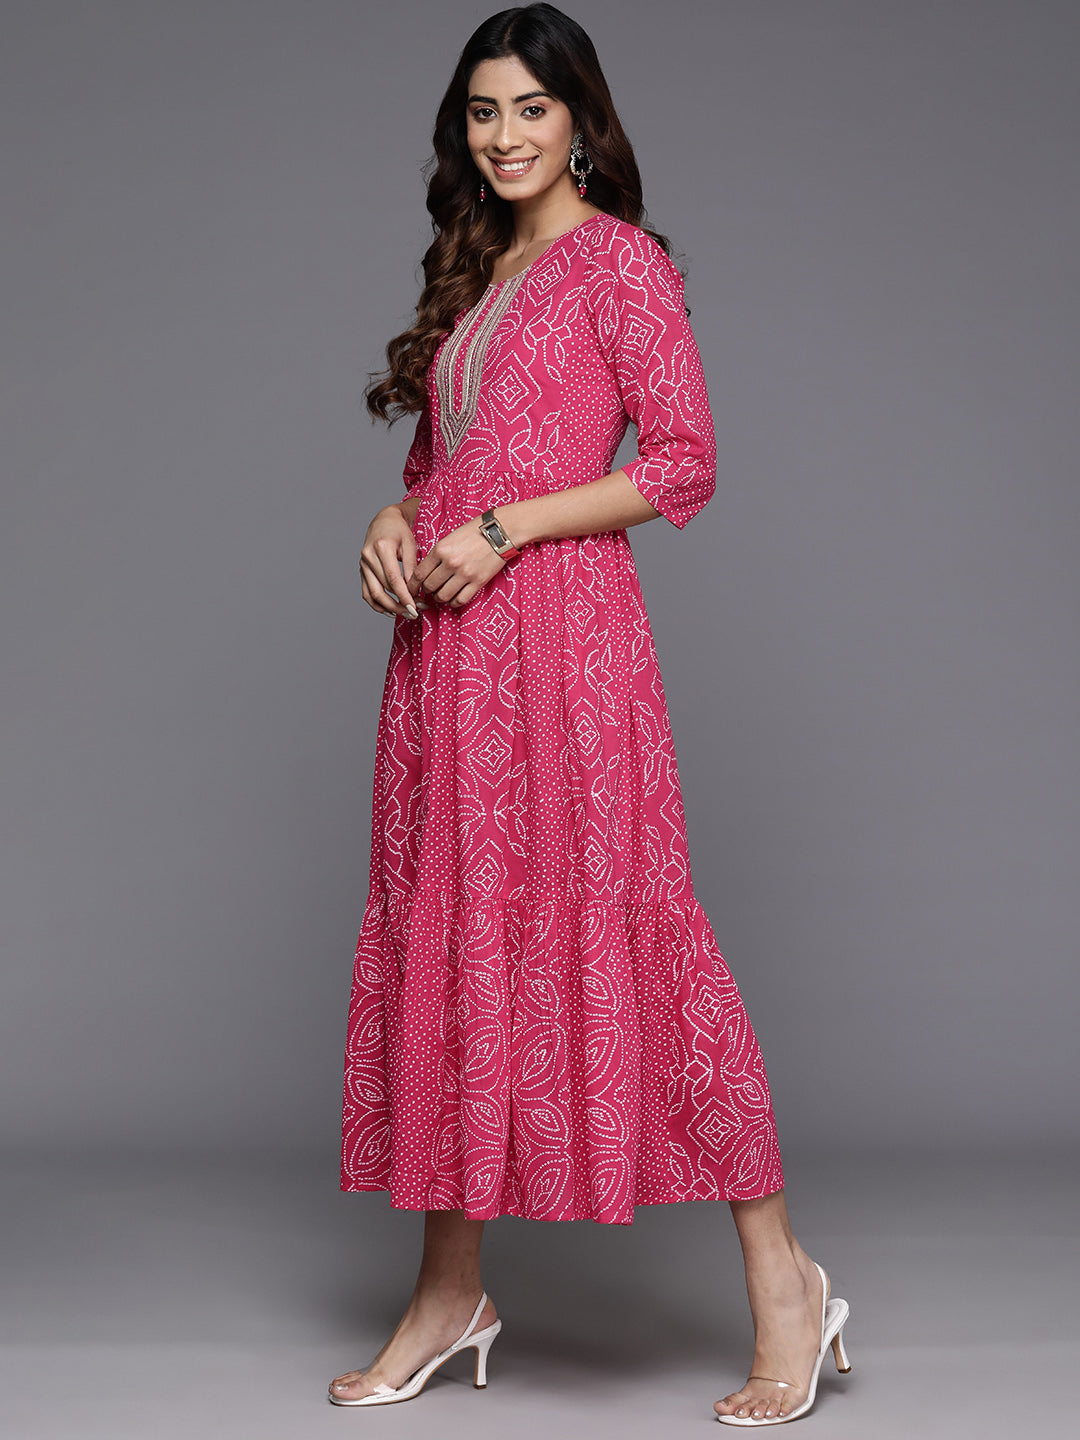 Bandhani Printed Sequined Tiered A-Line Pure Cotton Ethnic Dress